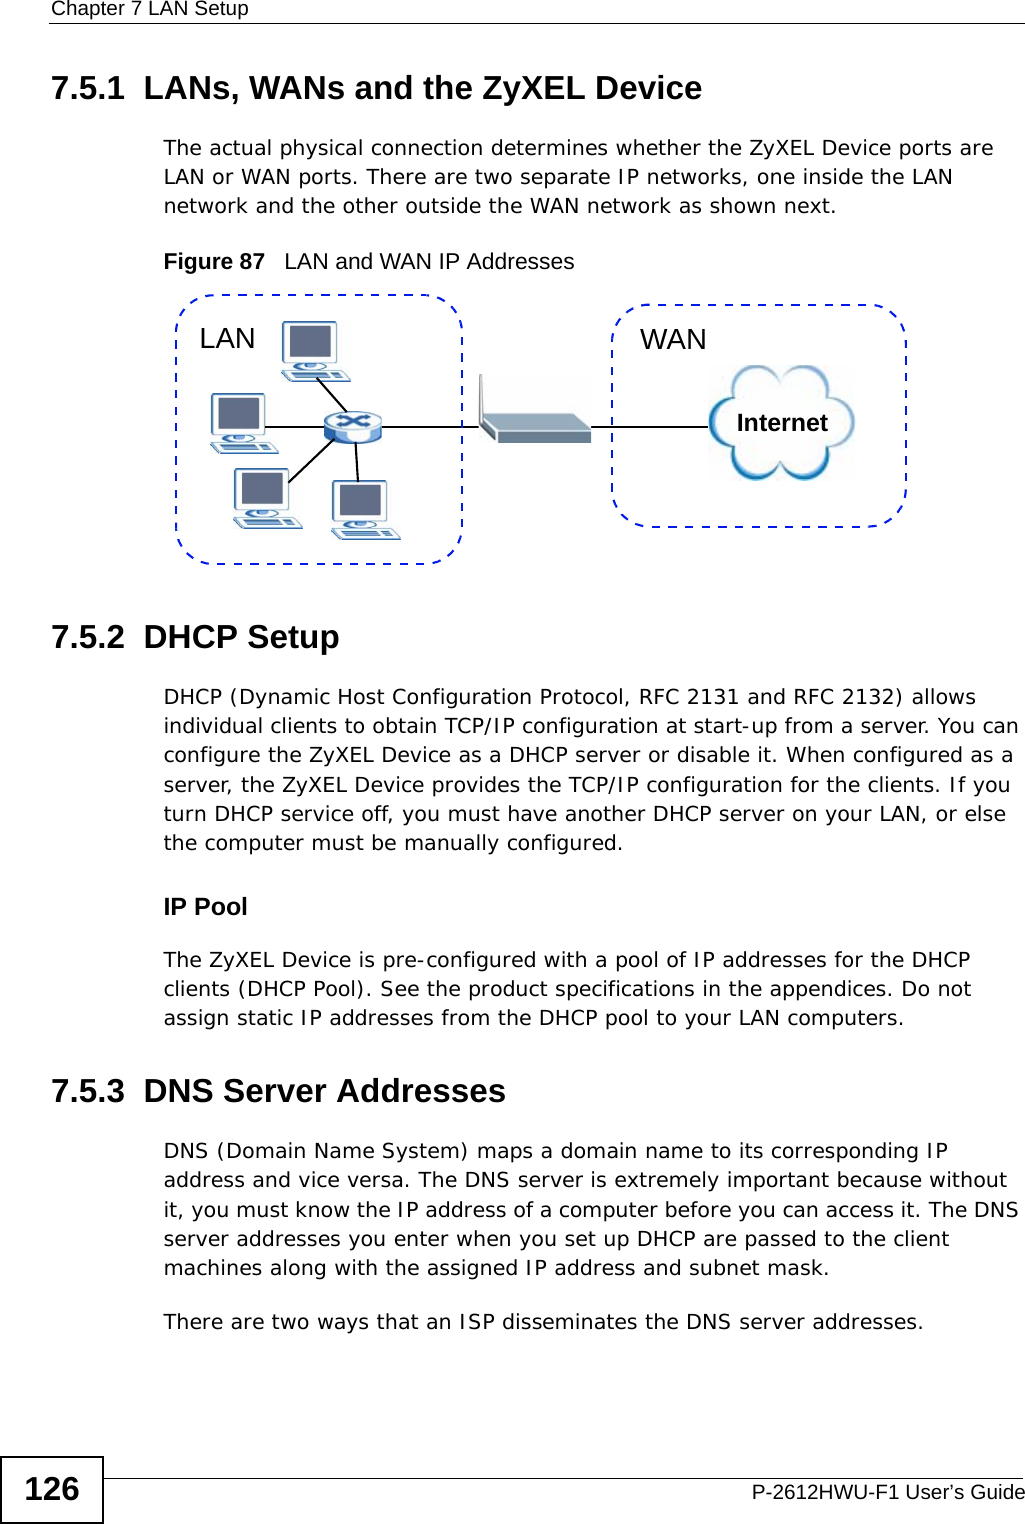 Chapter 7 LAN SetupP-2612HWU-F1 User’s Guide1267.5.1  LANs, WANs and the ZyXEL DeviceThe actual physical connection determines whether the ZyXEL Device ports are LAN or WAN ports. There are two separate IP networks, one inside the LAN network and the other outside the WAN network as shown next.Figure 87   LAN and WAN IP Addresses7.5.2  DHCP SetupDHCP (Dynamic Host Configuration Protocol, RFC 2131 and RFC 2132) allows individual clients to obtain TCP/IP configuration at start-up from a server. You can configure the ZyXEL Device as a DHCP server or disable it. When configured as a server, the ZyXEL Device provides the TCP/IP configuration for the clients. If you turn DHCP service off, you must have another DHCP server on your LAN, or else the computer must be manually configured. IP PoolThe ZyXEL Device is pre-configured with a pool of IP addresses for the DHCP clients (DHCP Pool). See the product specifications in the appendices. Do not assign static IP addresses from the DHCP pool to your LAN computers.7.5.3  DNS Server Addresses DNS (Domain Name System) maps a domain name to its corresponding IP address and vice versa. The DNS server is extremely important because without it, you must know the IP address of a computer before you can access it. The DNS server addresses you enter when you set up DHCP are passed to the client machines along with the assigned IP address and subnet mask.There are two ways that an ISP disseminates the DNS server addresses. InternetWANLAN